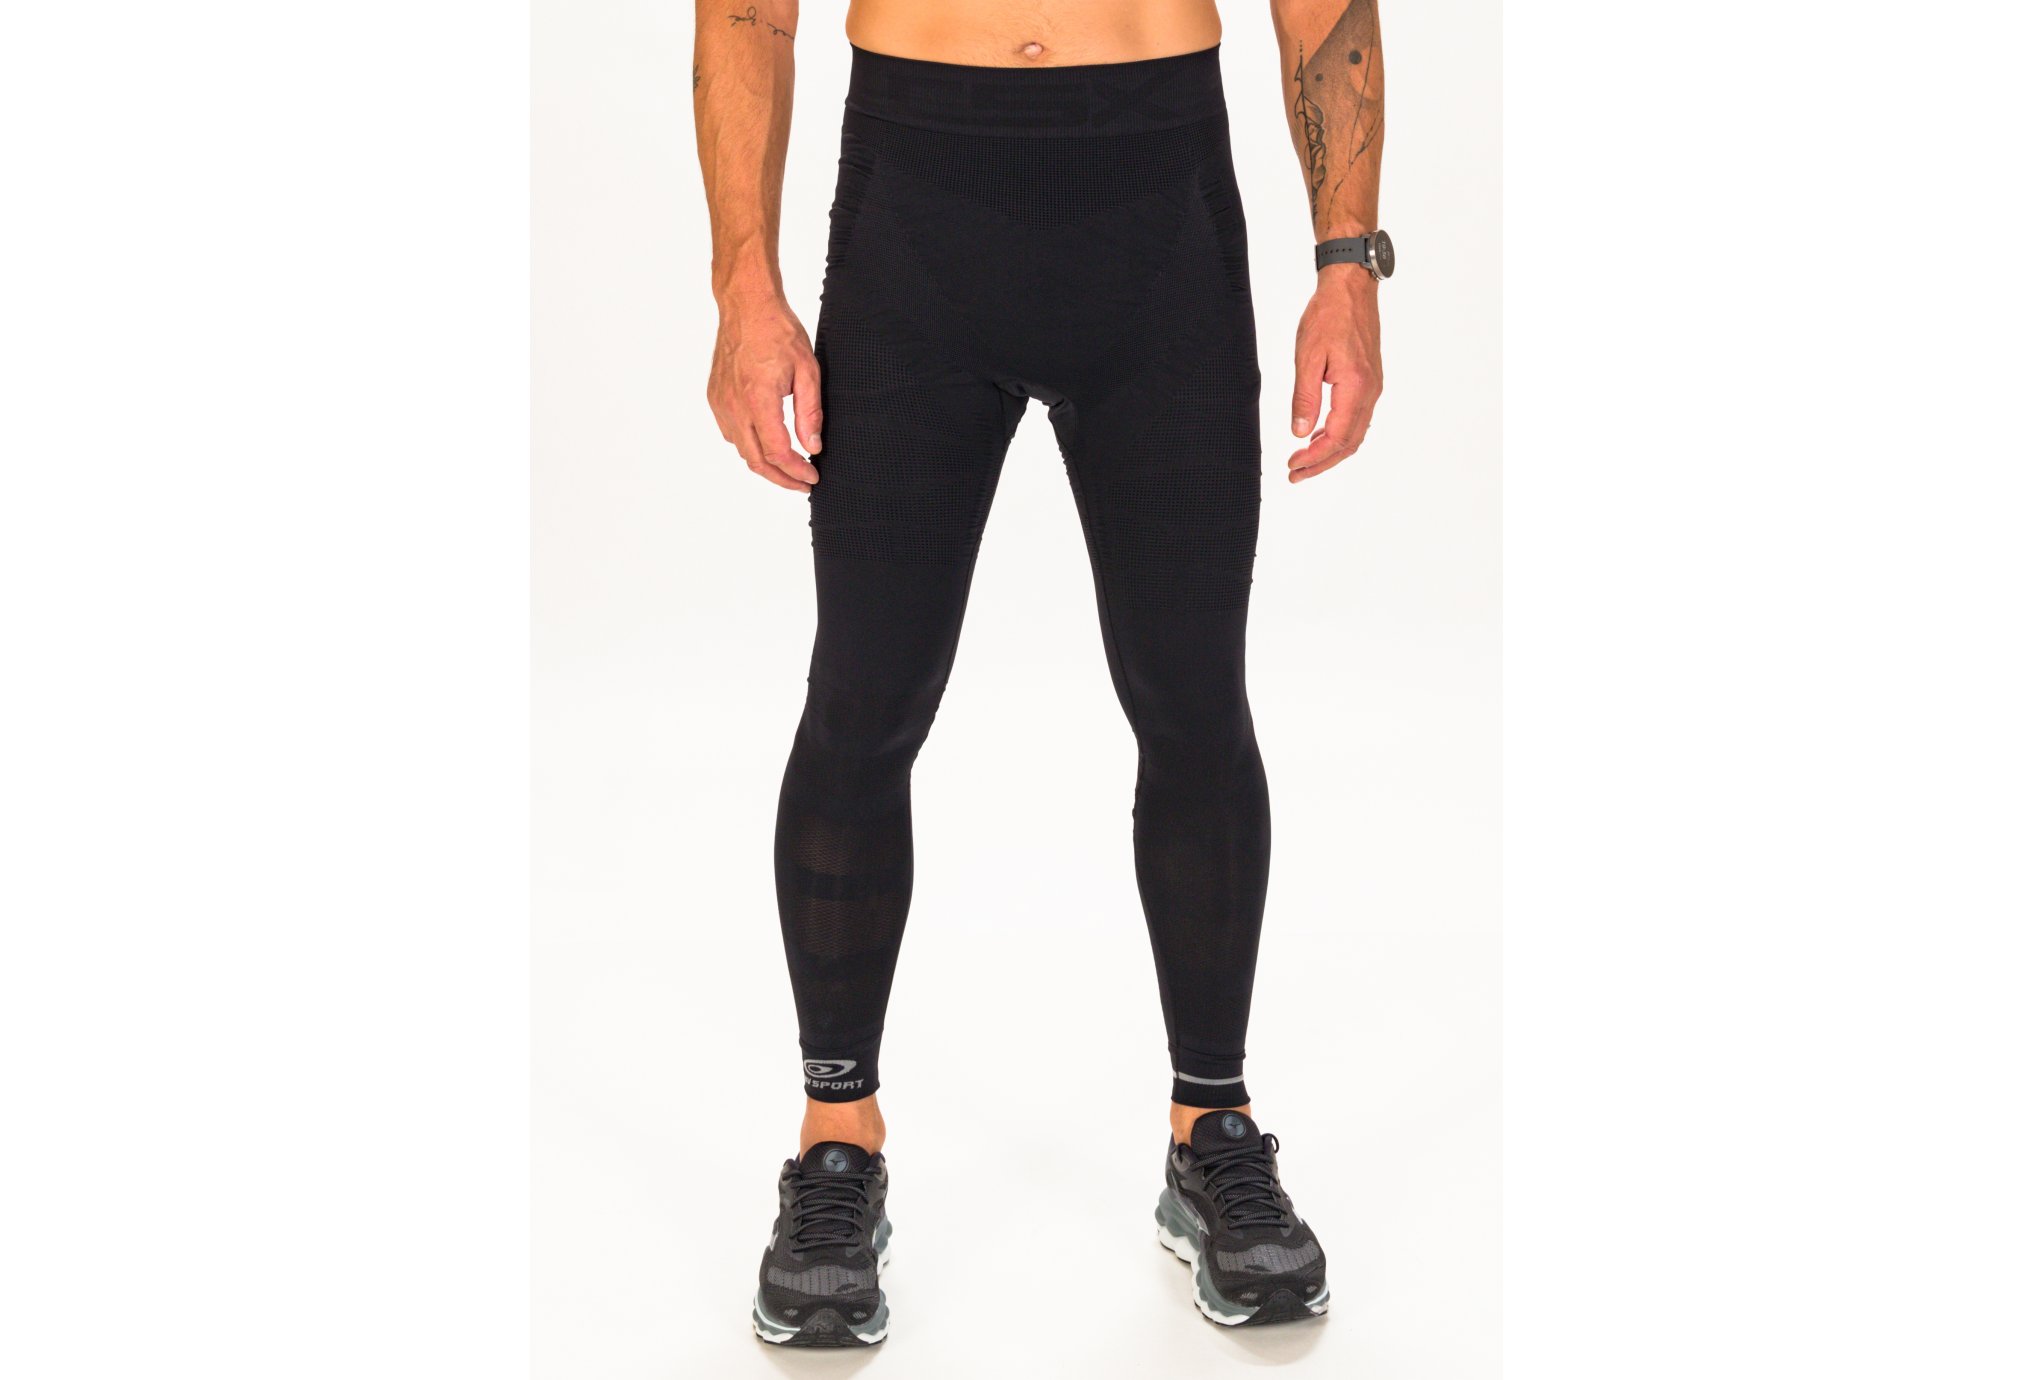 Nike Collant Power Speed M homme pas cher